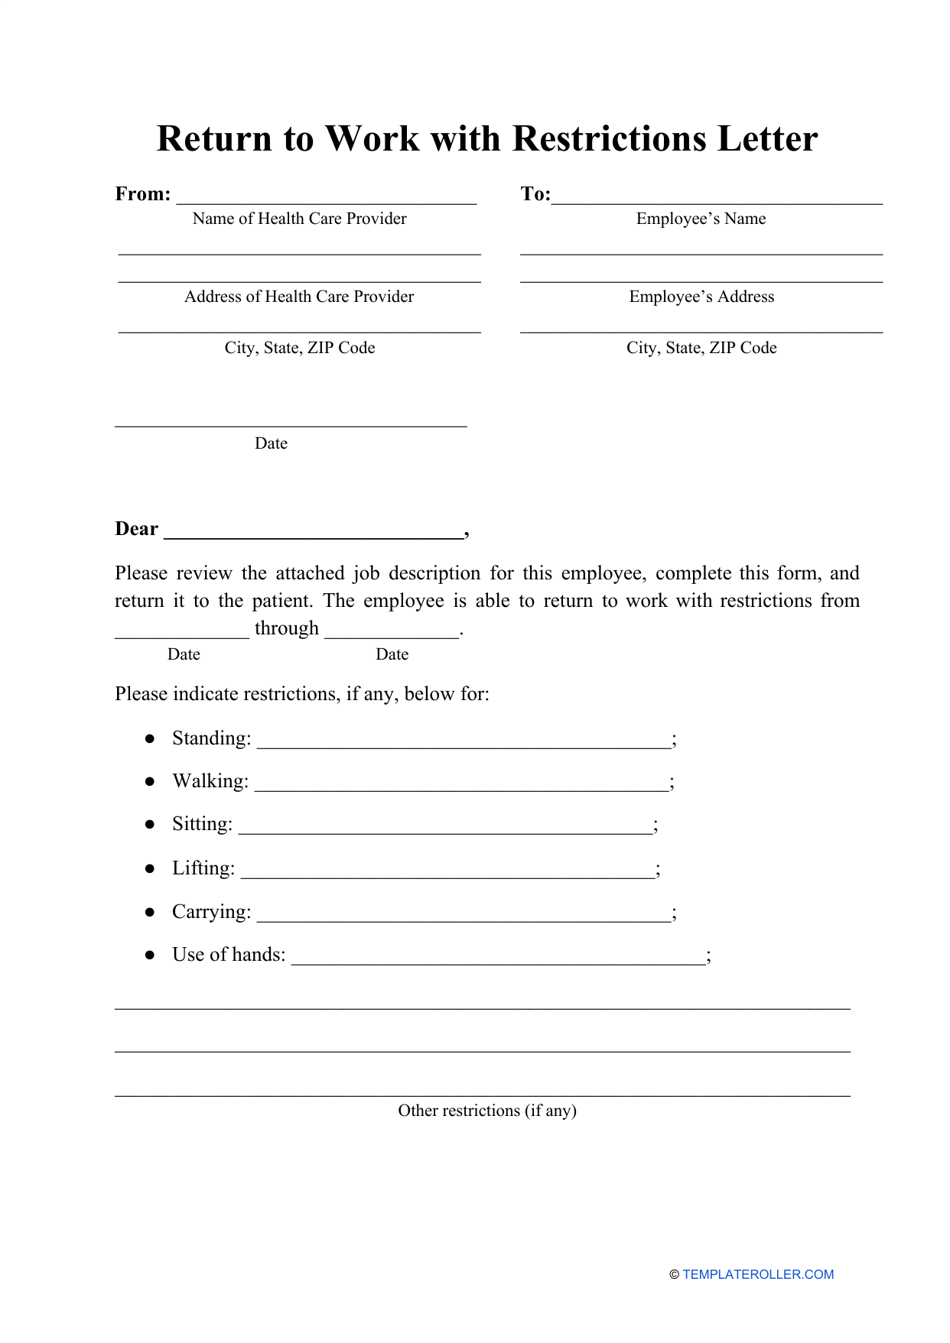 Return to Work with Restrictions Letter Template - A formal document to notify employers regarding an employee's return to work with specified restrictions and instructions. Designed for various industries with adjustable content to comply with workplace policies.